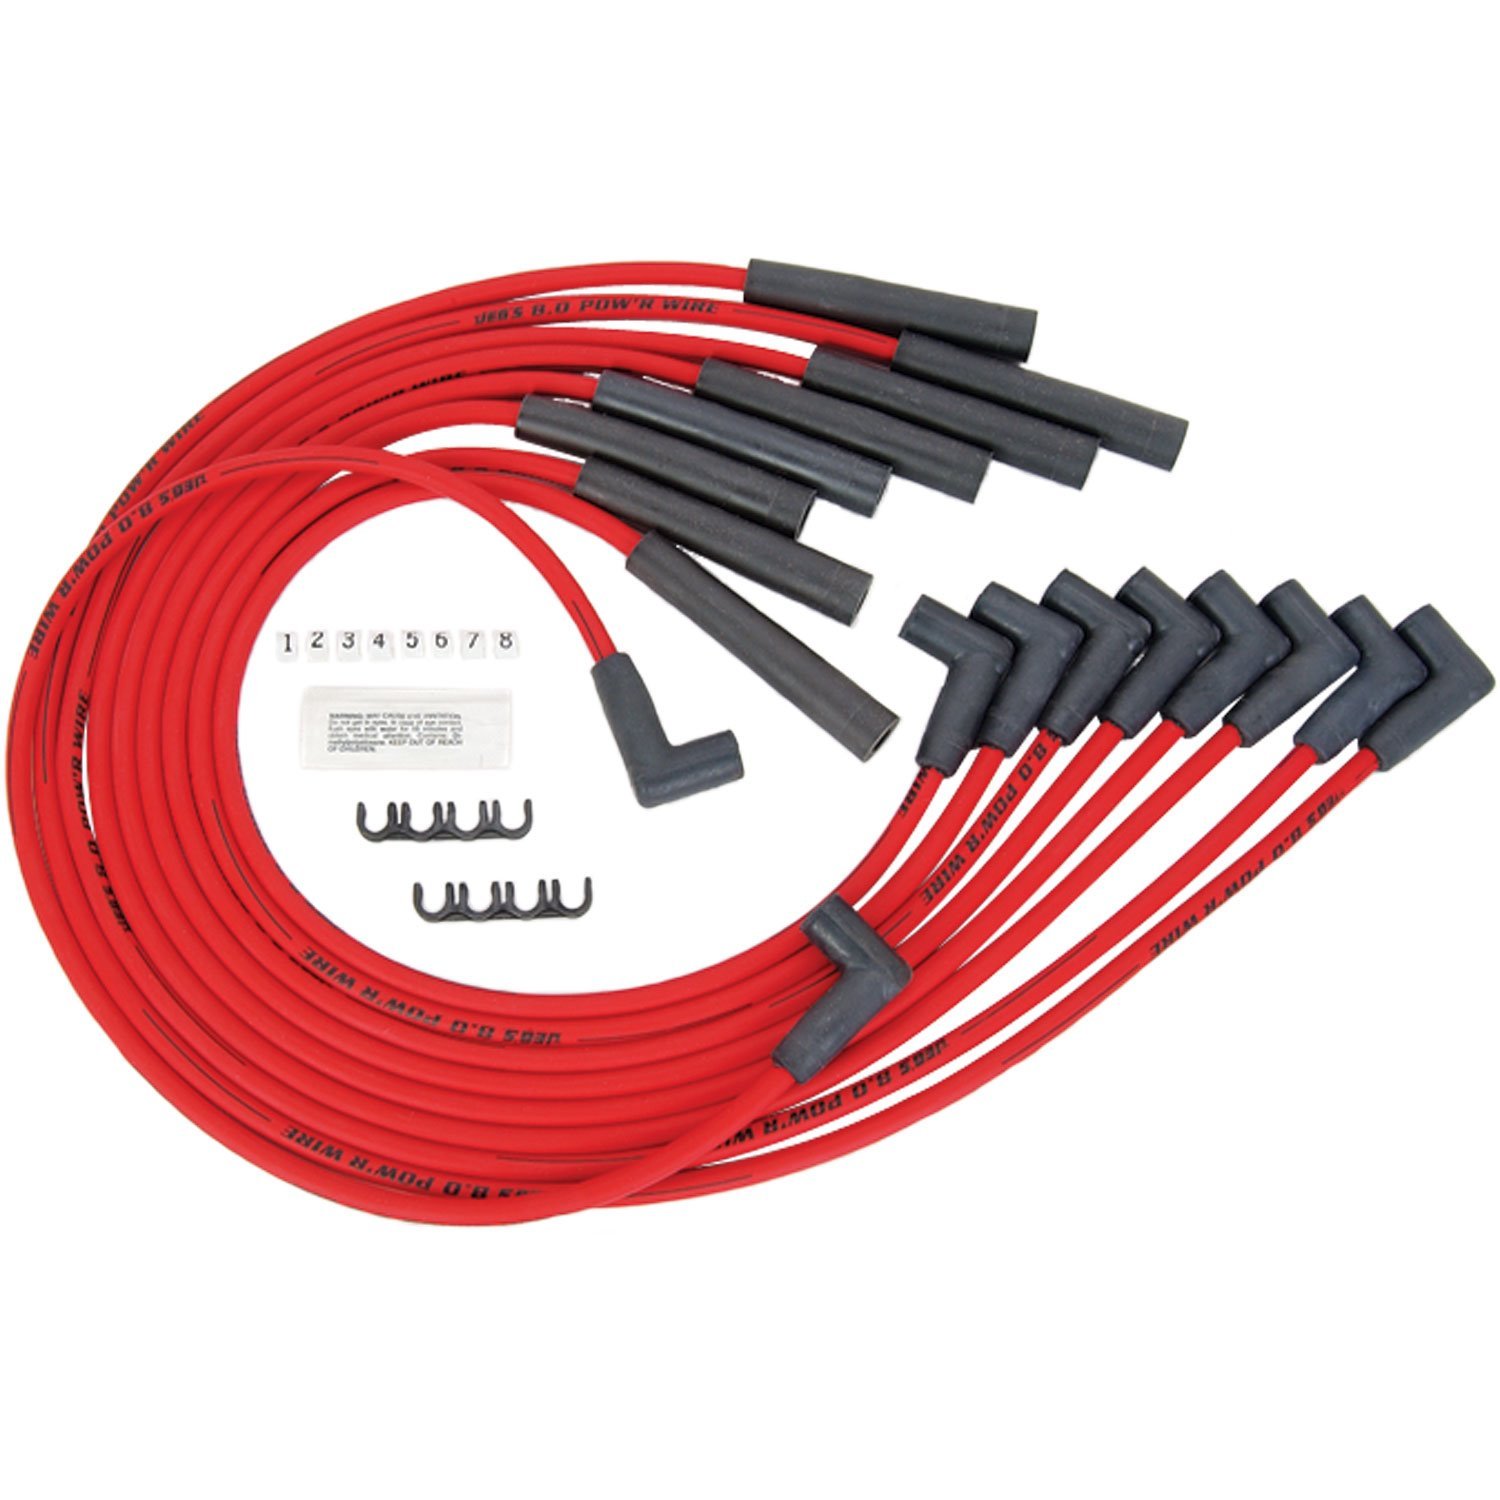 8.0mm Red Hot Pow'r Wires Ford 351W, 351C, 390, 429, 460 with HEI Cap